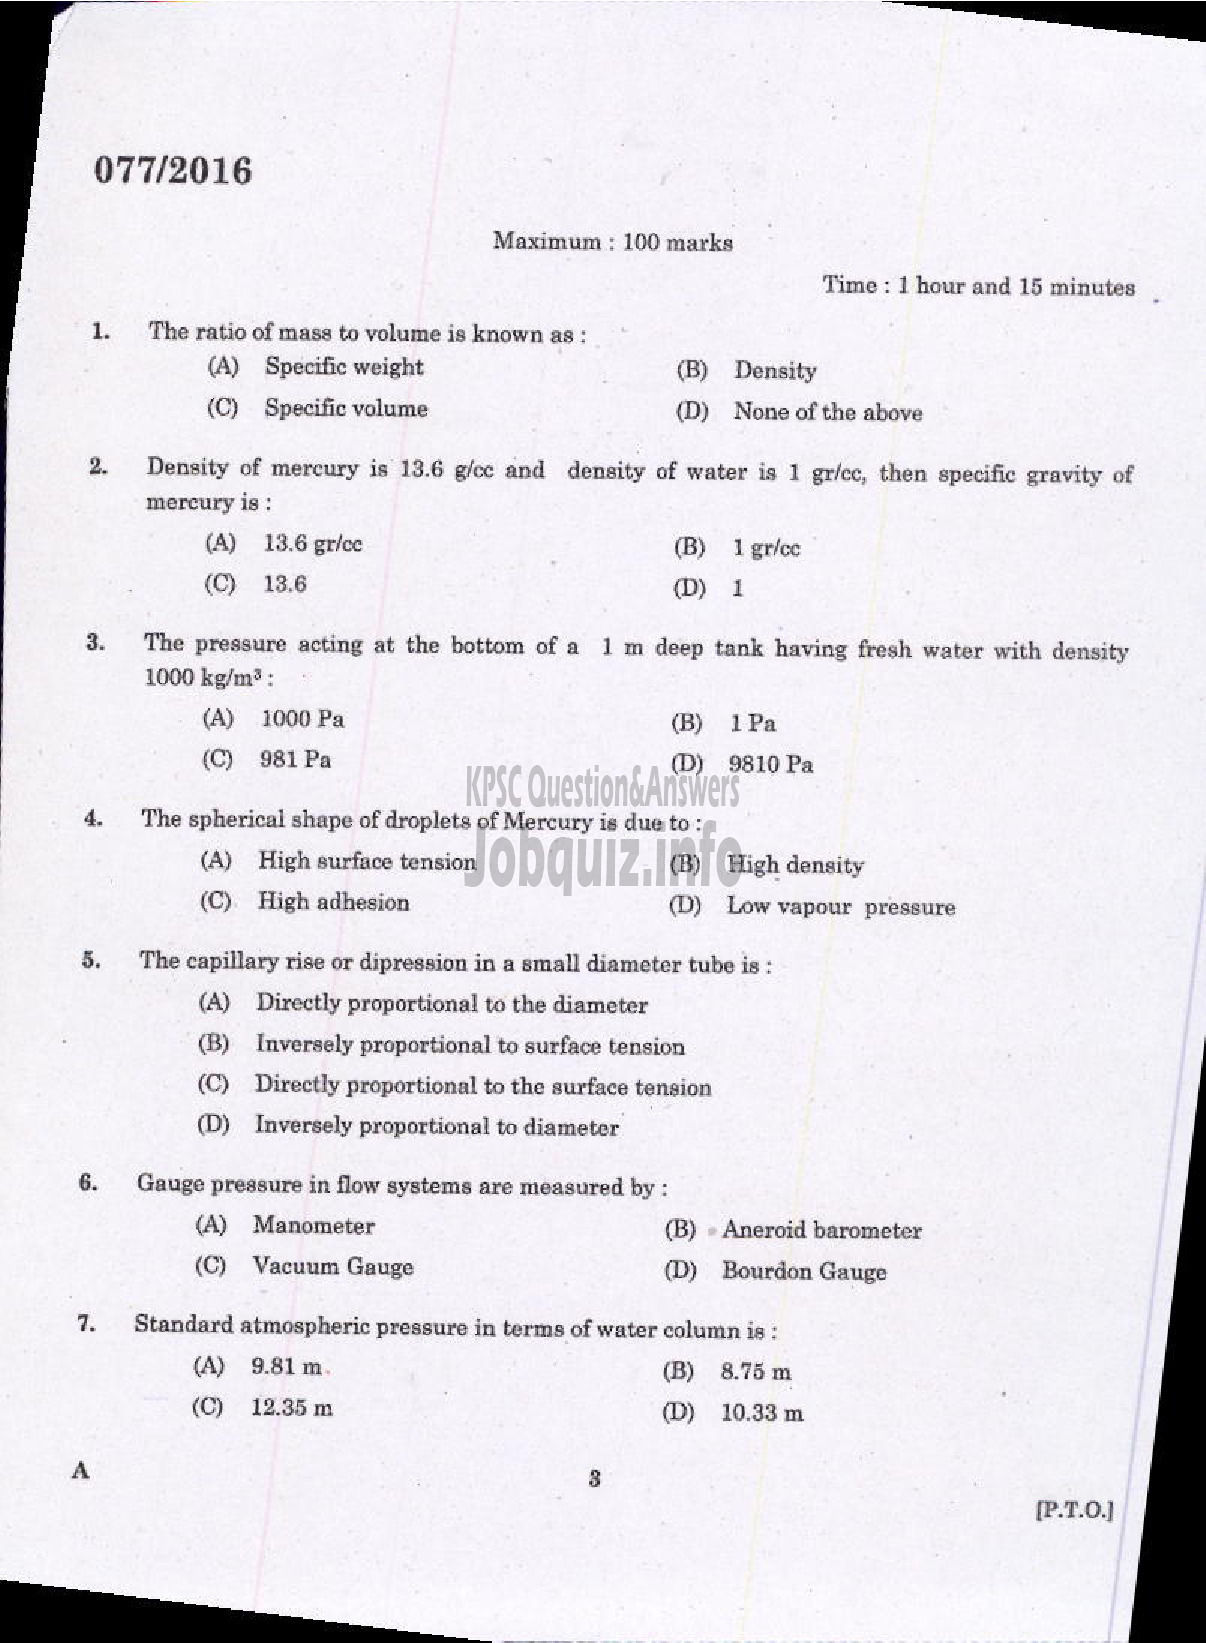 Kerala PSC Question Paper - VOCATIONAL INSTRUCTOR IN MECHANICAL SERVICING AGRO MACHINERY VHSE-1